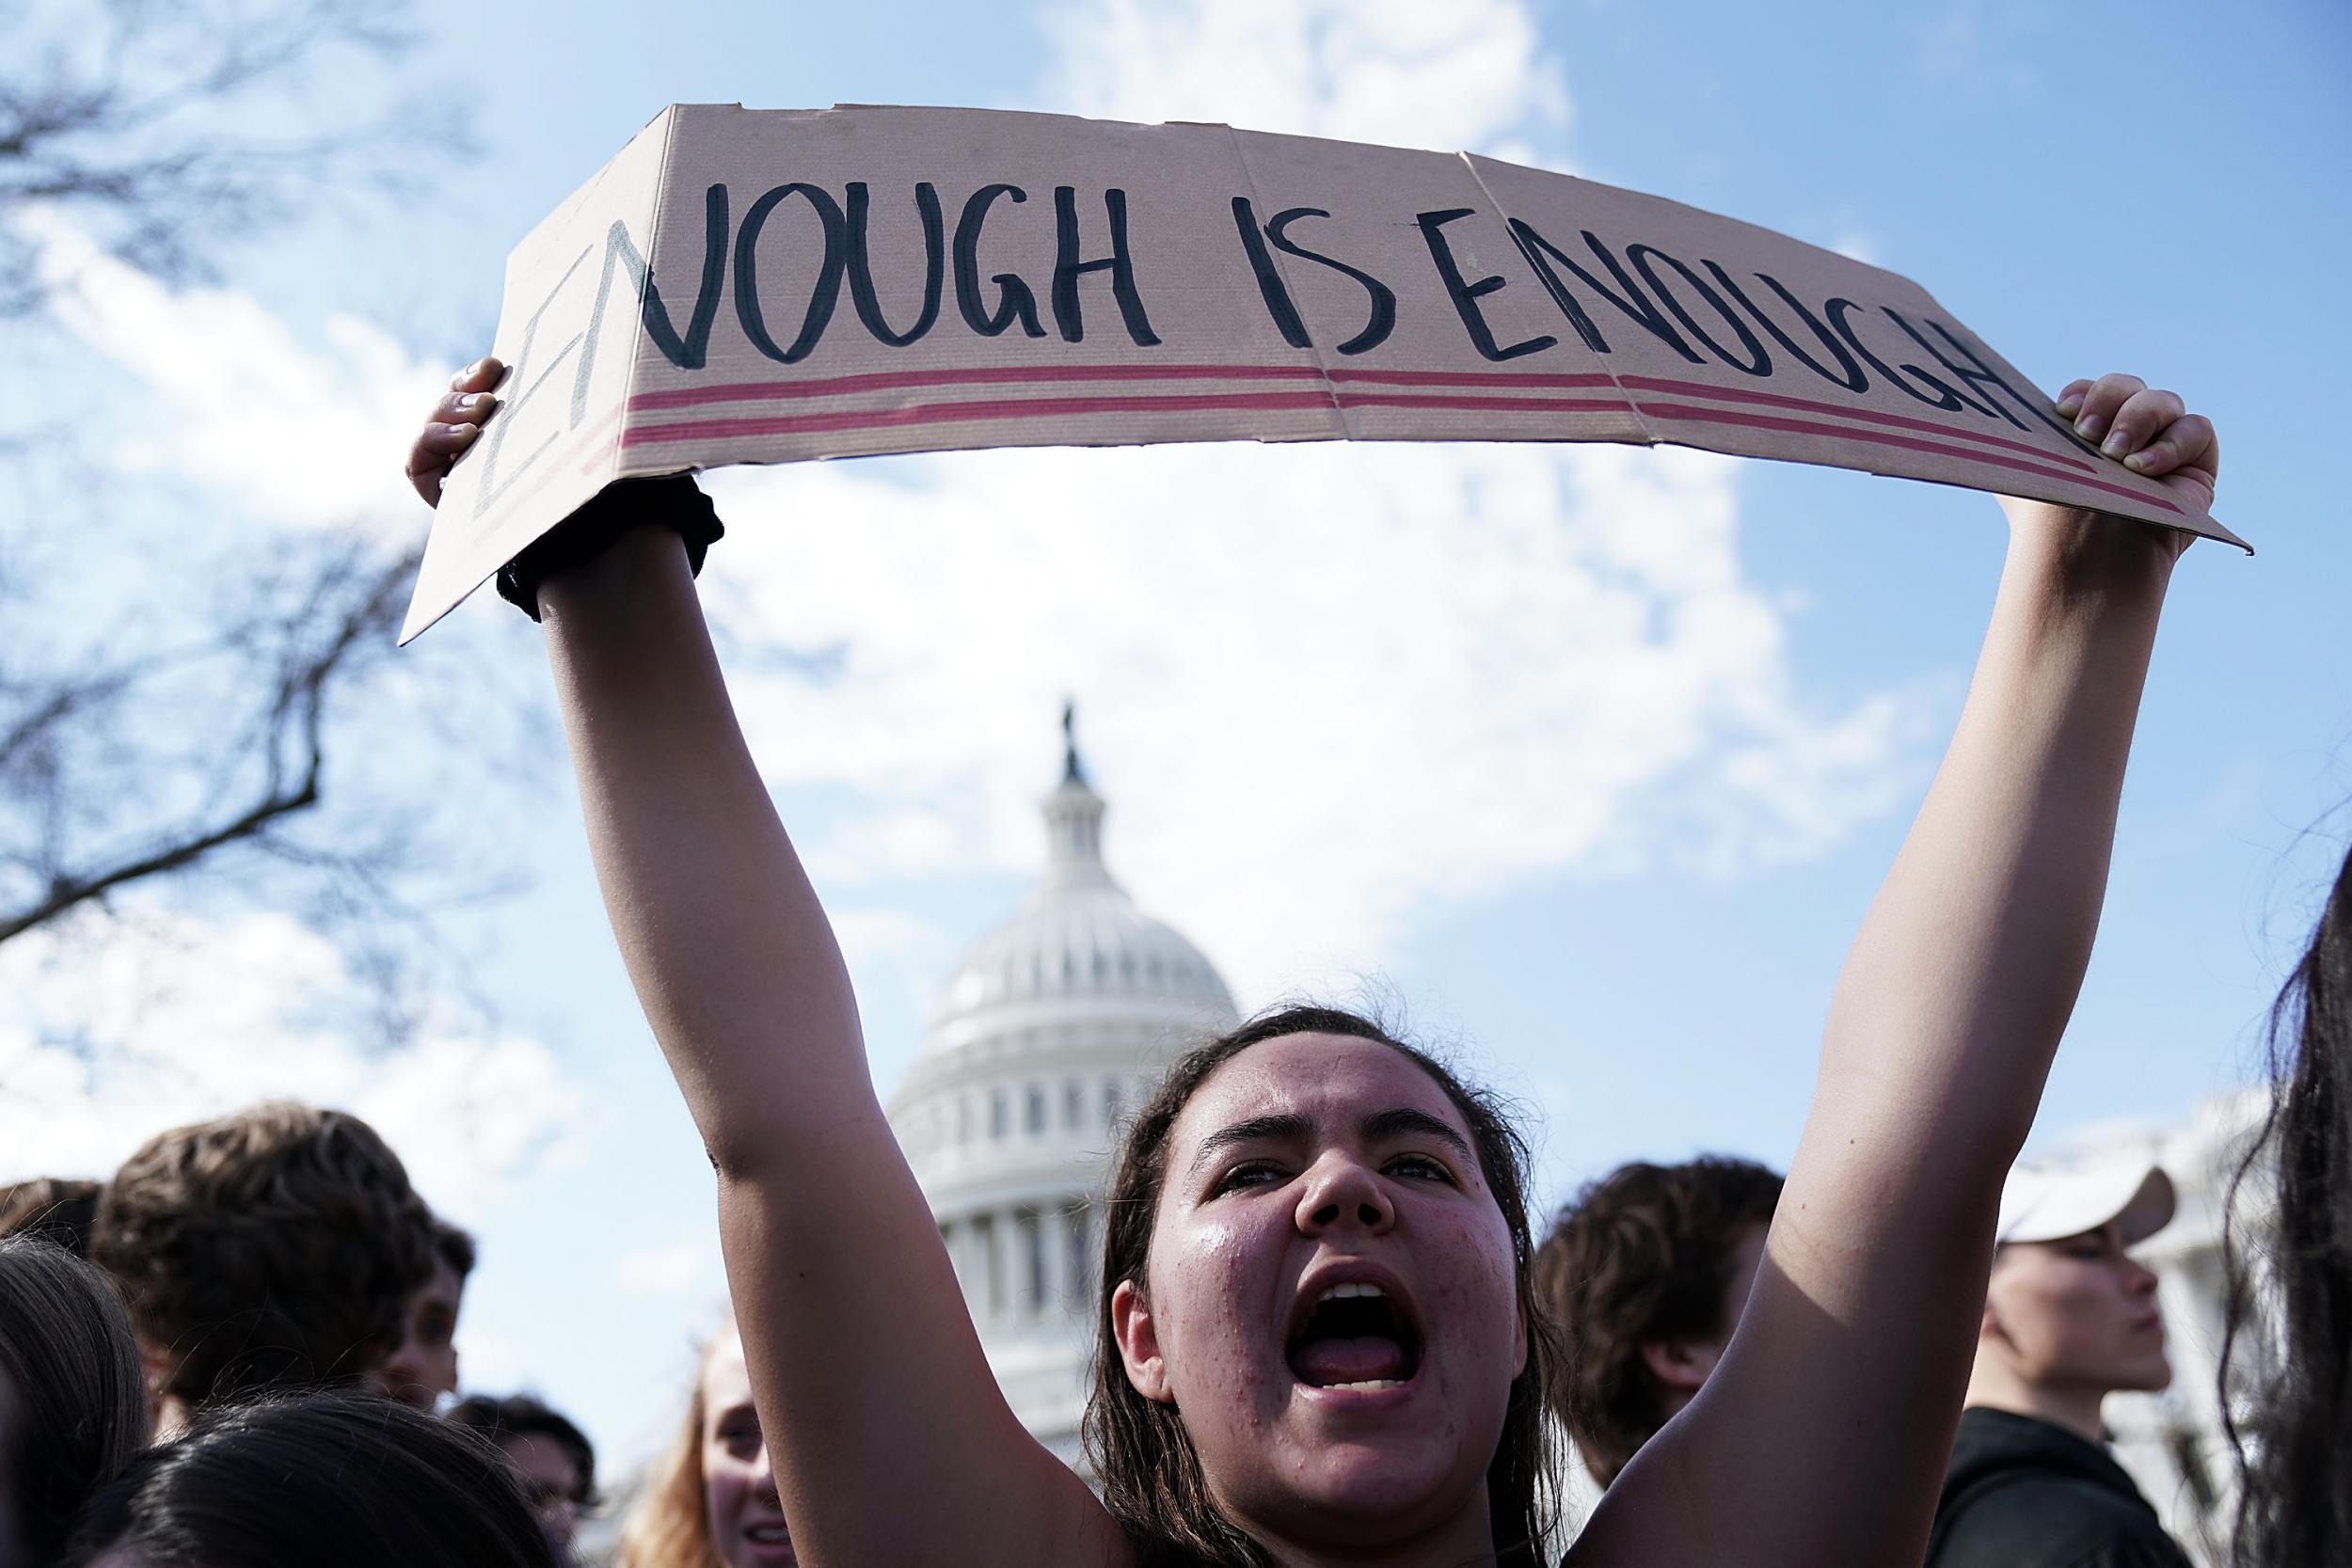 Students participate in a protest against gun violence on Capitol Hill in Washington DC